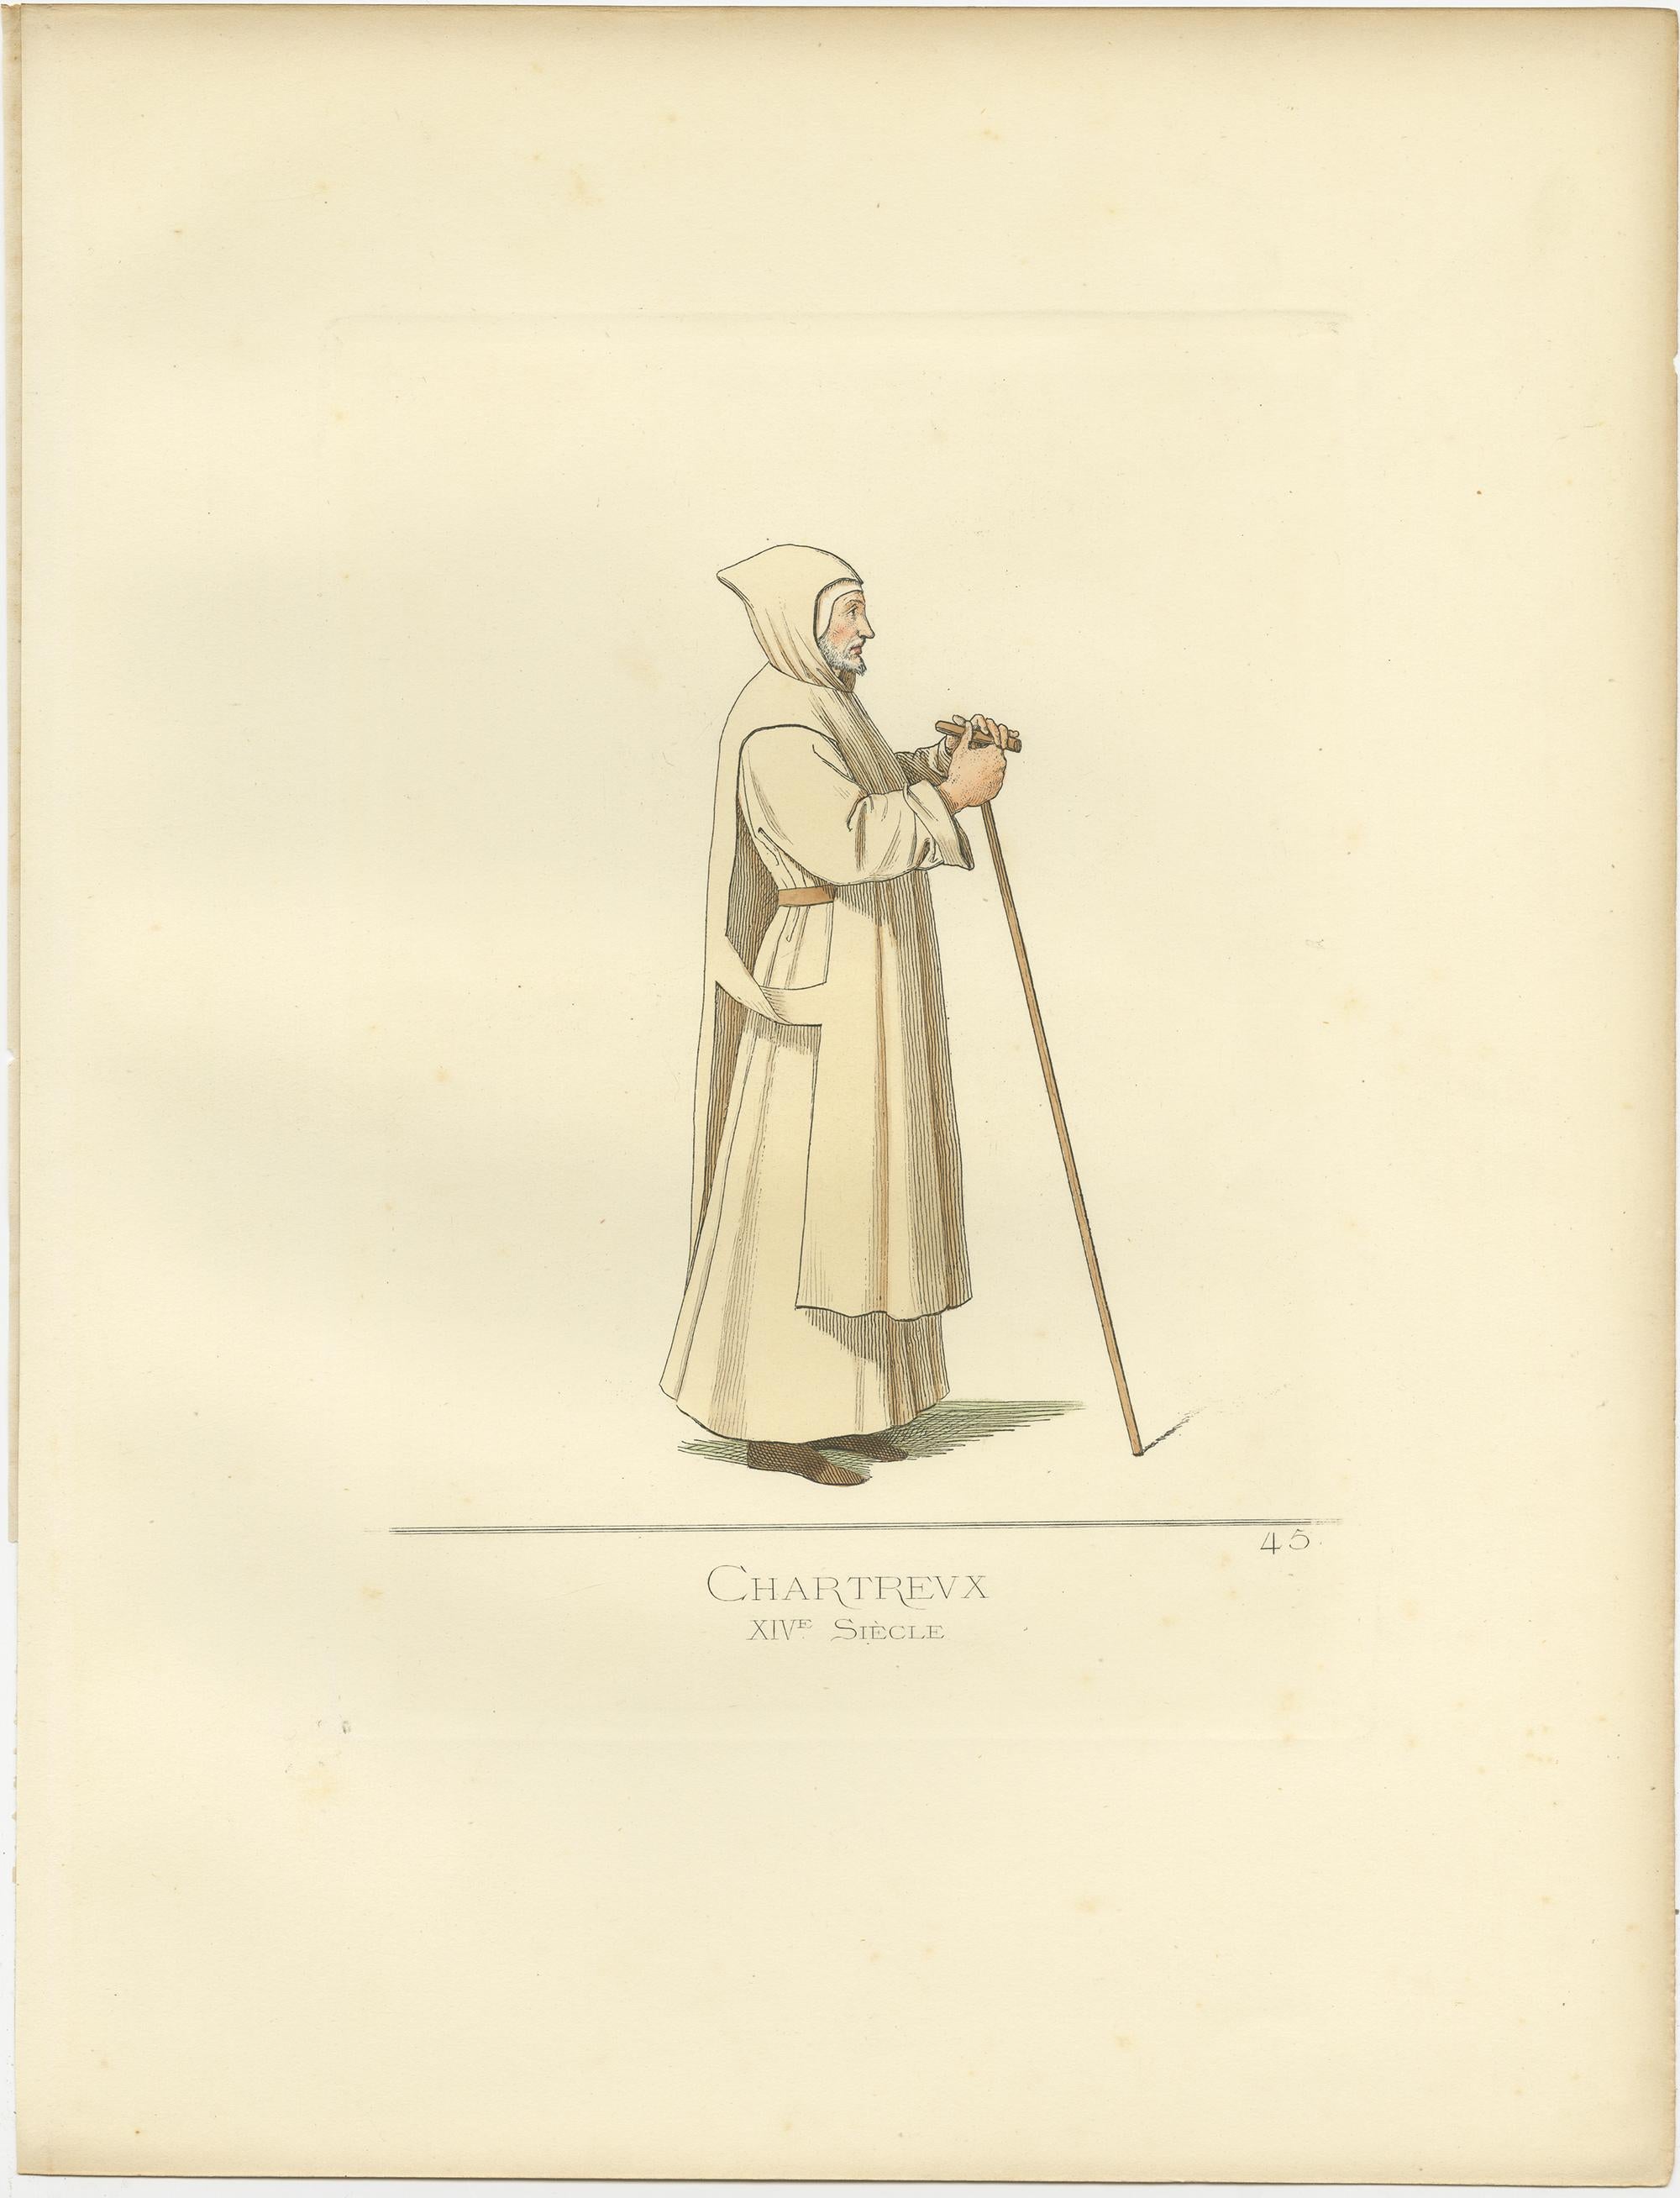 The antique print titled 'Chartreux, XIVe Siecle' is a historically significant representation of a Carthusian monk from the 14th century. This print is an original antique illustration originating from 'Costumes historiques de femmes du XIII, XIV